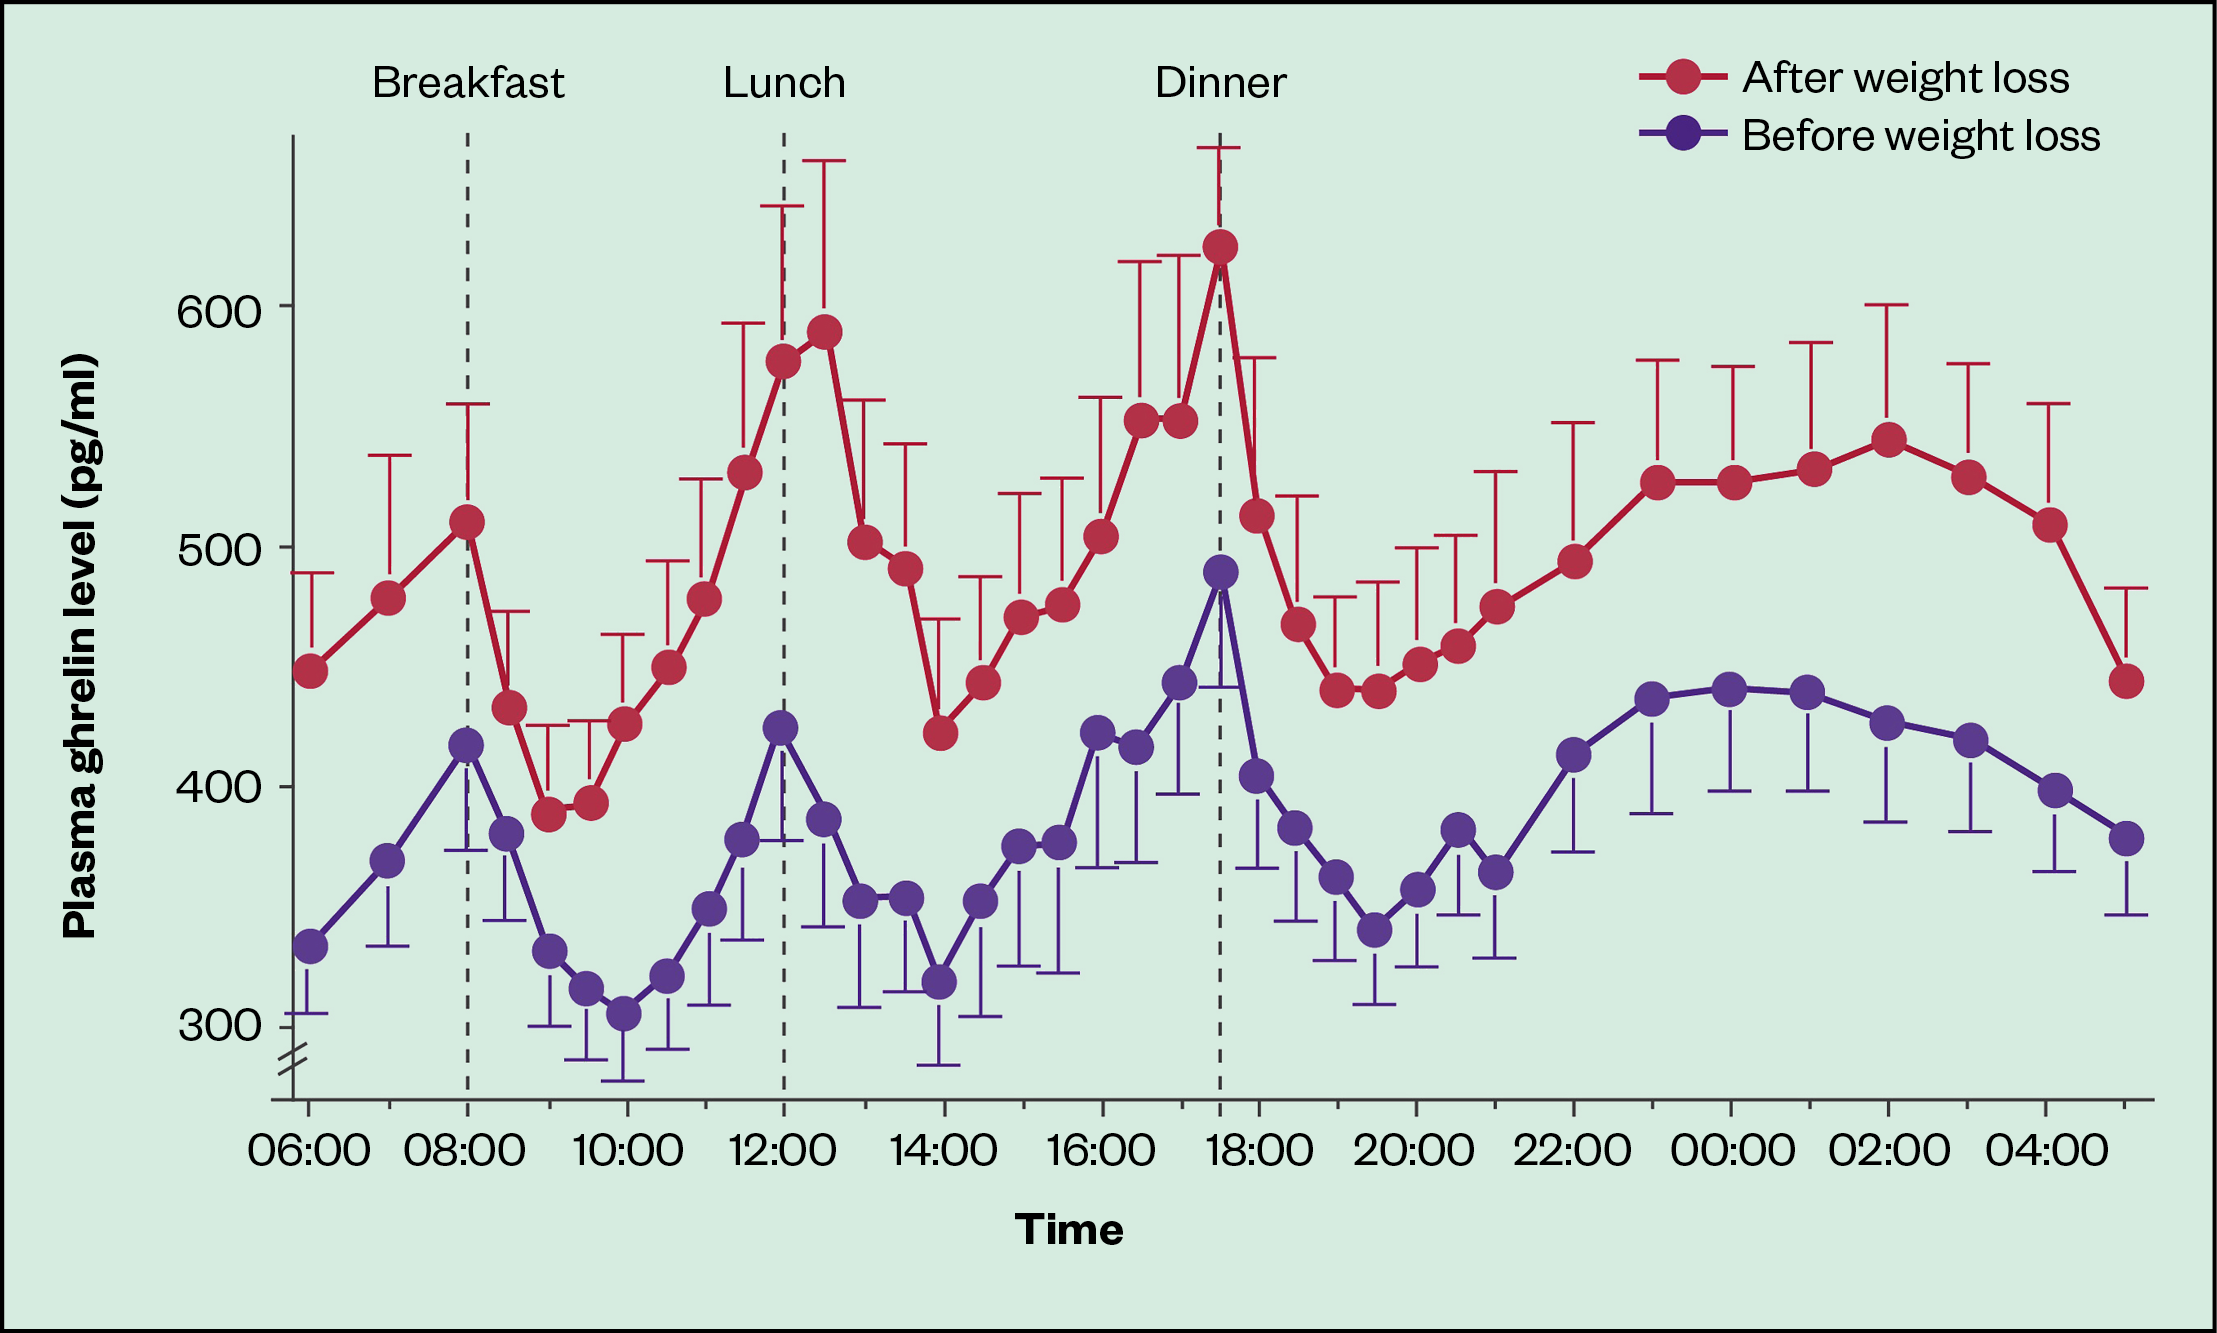 Figure 1: Mean (±SE) 24-hour ghrelin levels before and after diet-induced weight loss
Ghrelin is a hormone, primarily secreted by the stomach and duodenum, that normally increases in the blood before meals and is thought to stimulate hunger, increase body weight and decrease metabolic rate